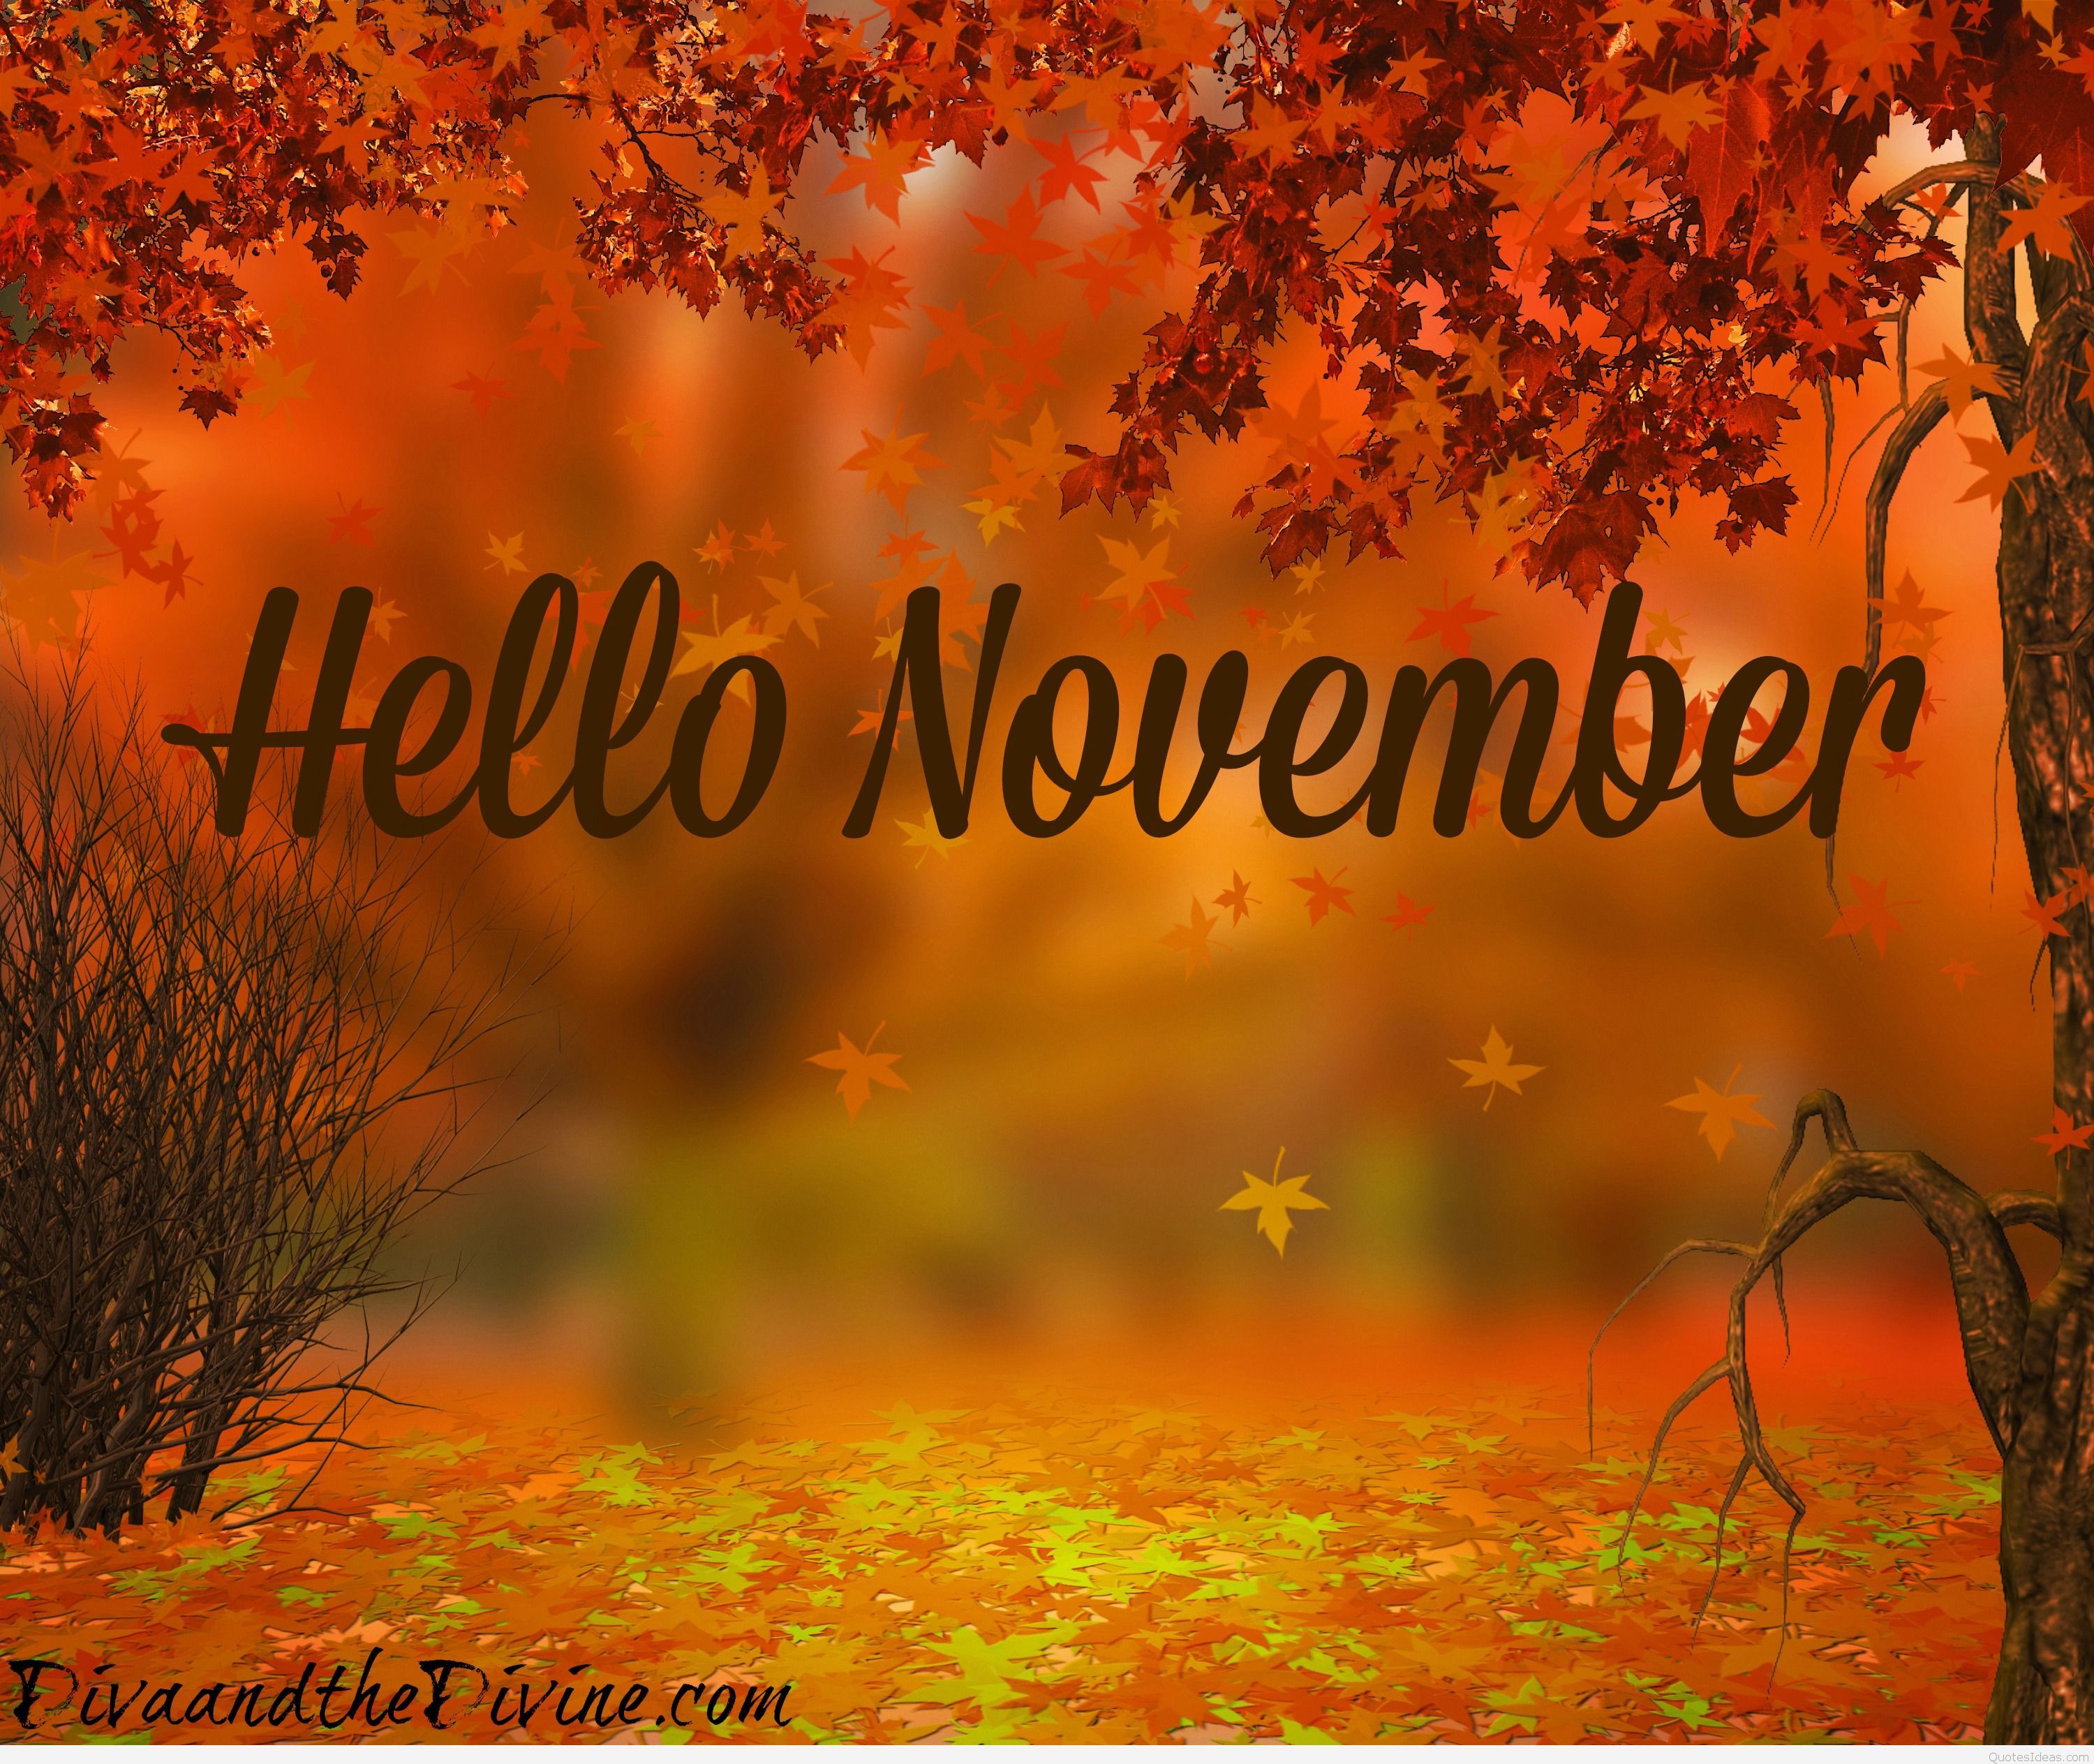 November is made for weekends